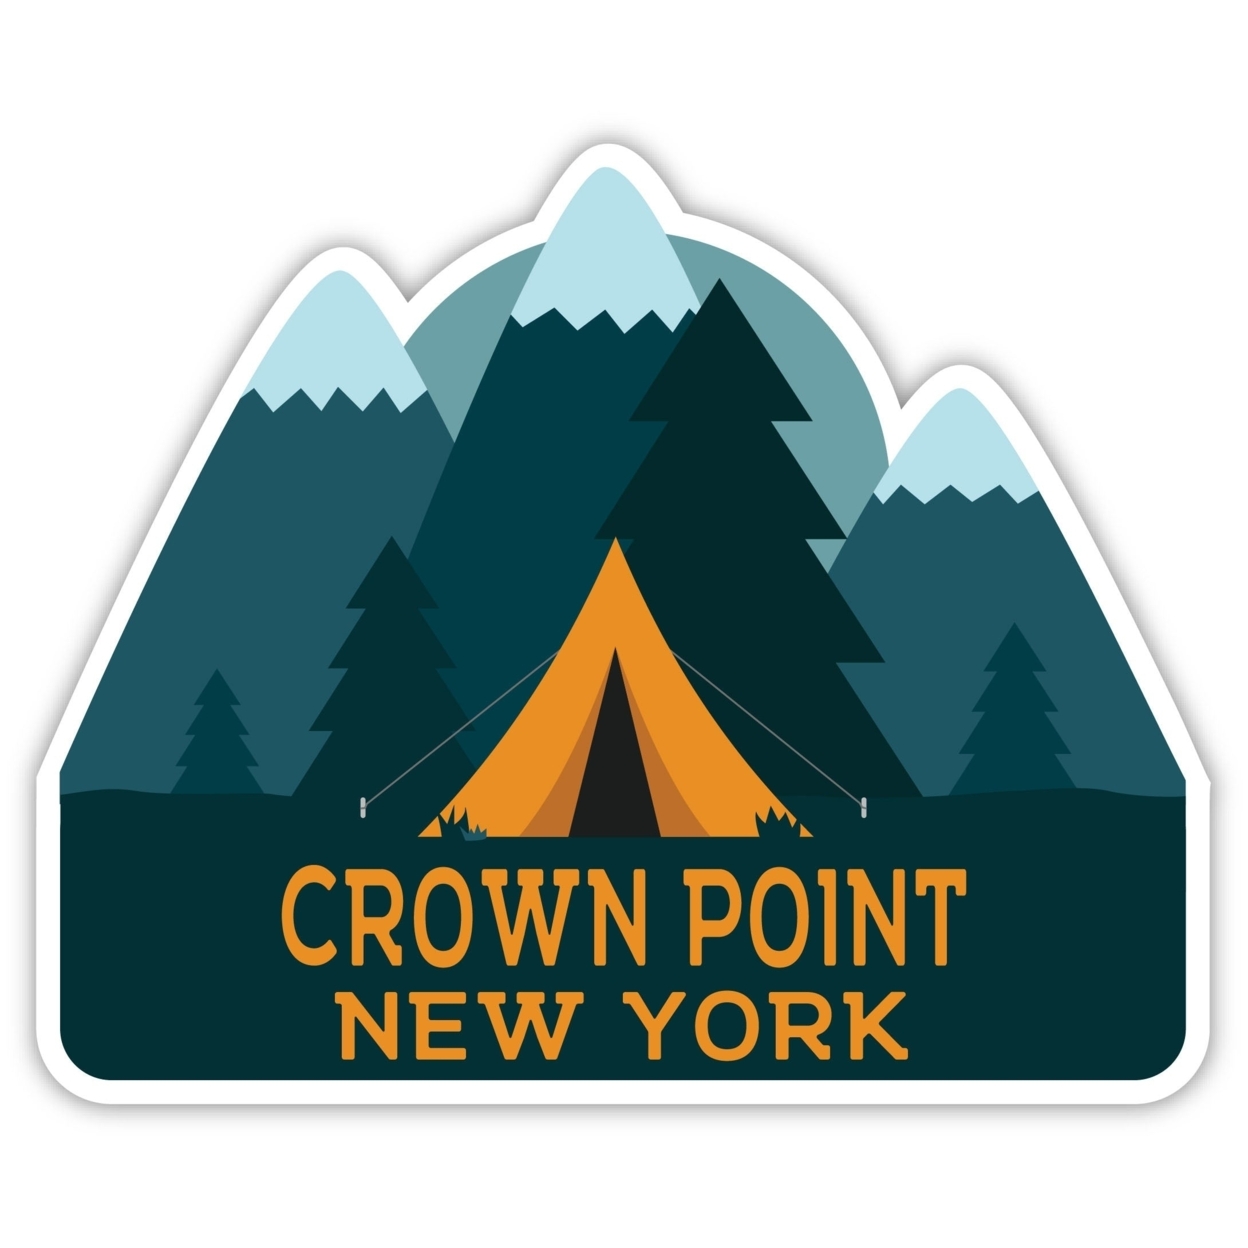 Crown Point New York Souvenir Decorative Stickers (Choose Theme And Size) - 4-Pack, 10-Inch, Tent